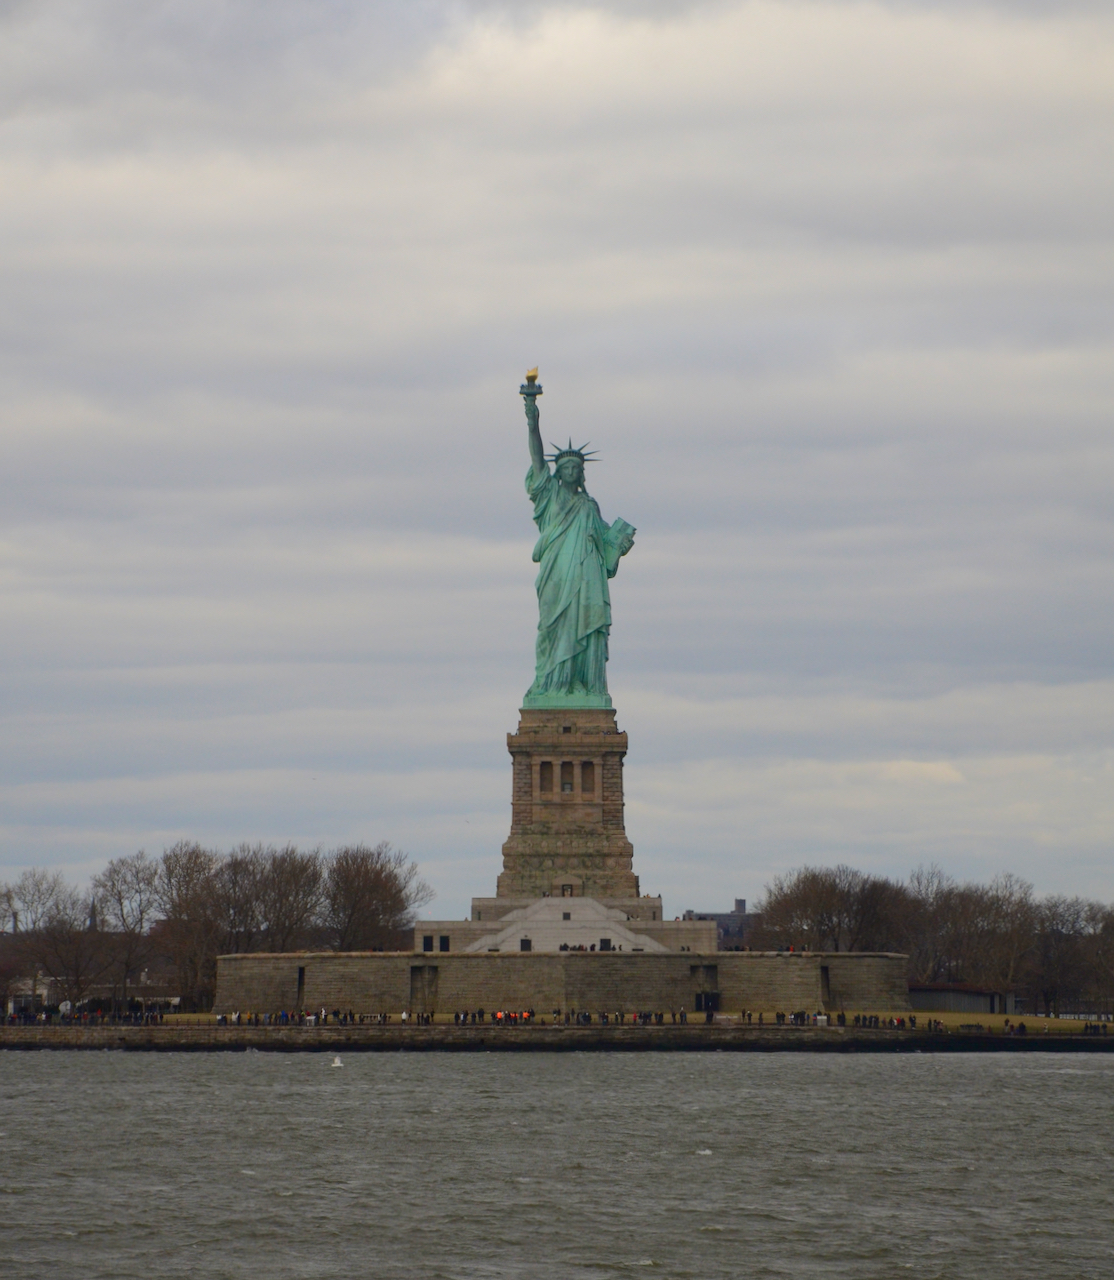 Classic image of the Statue of Liberty.